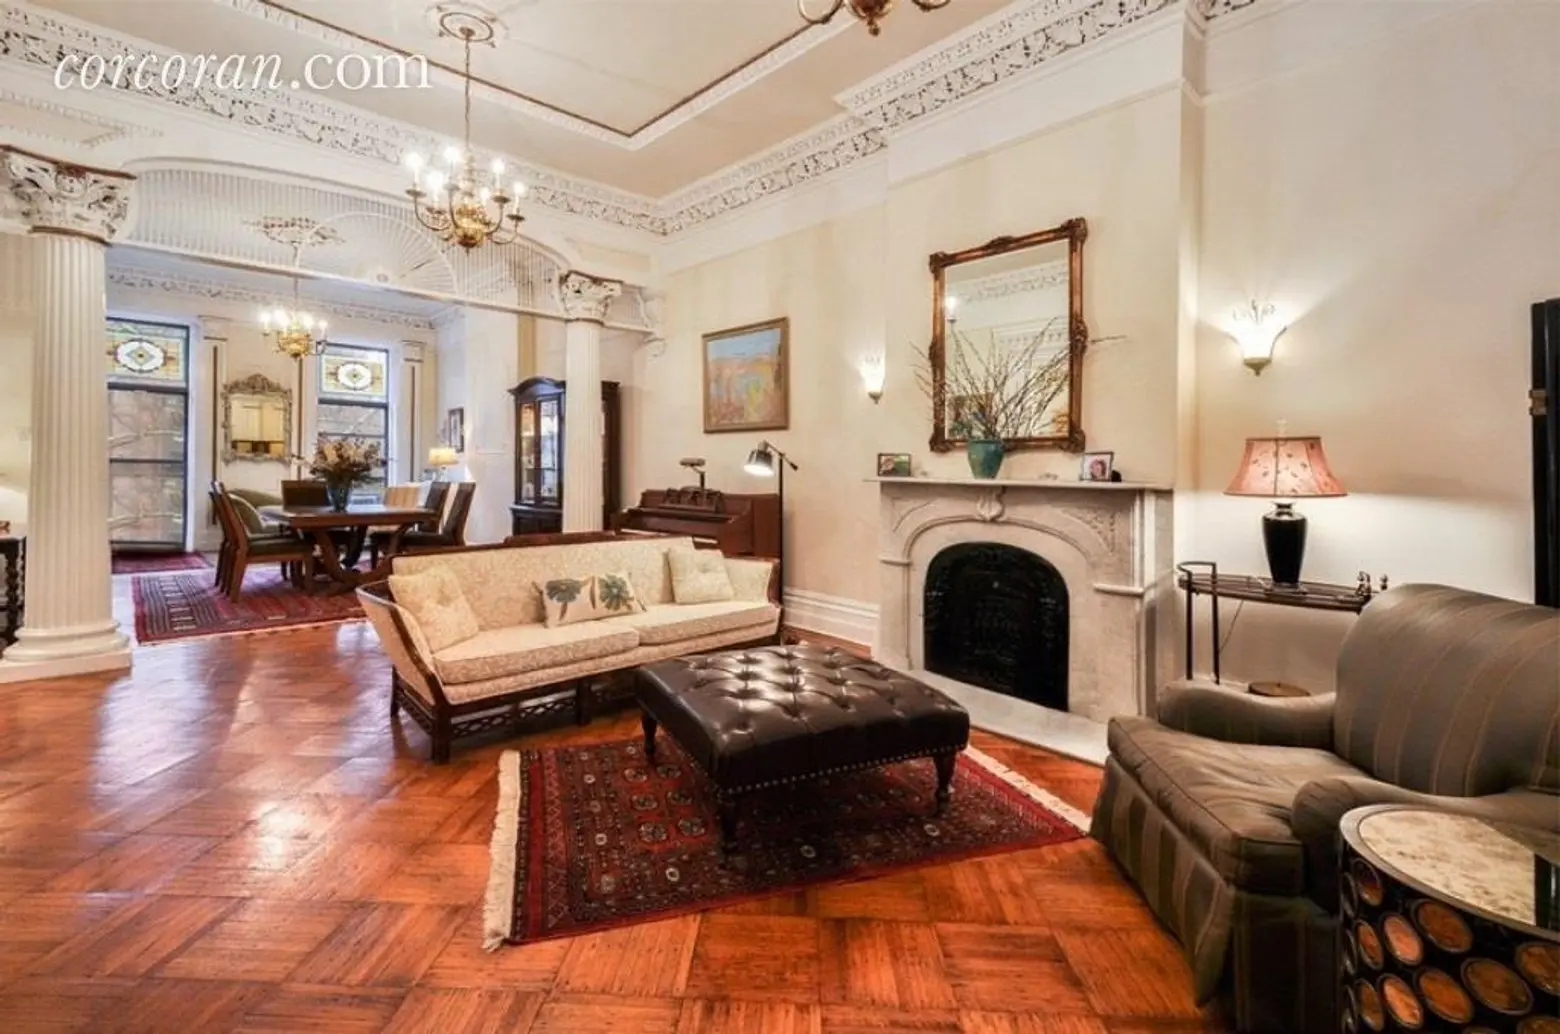 Grand Carroll Gardens Brownstone With Original Details Gets a Price Chop to $6M